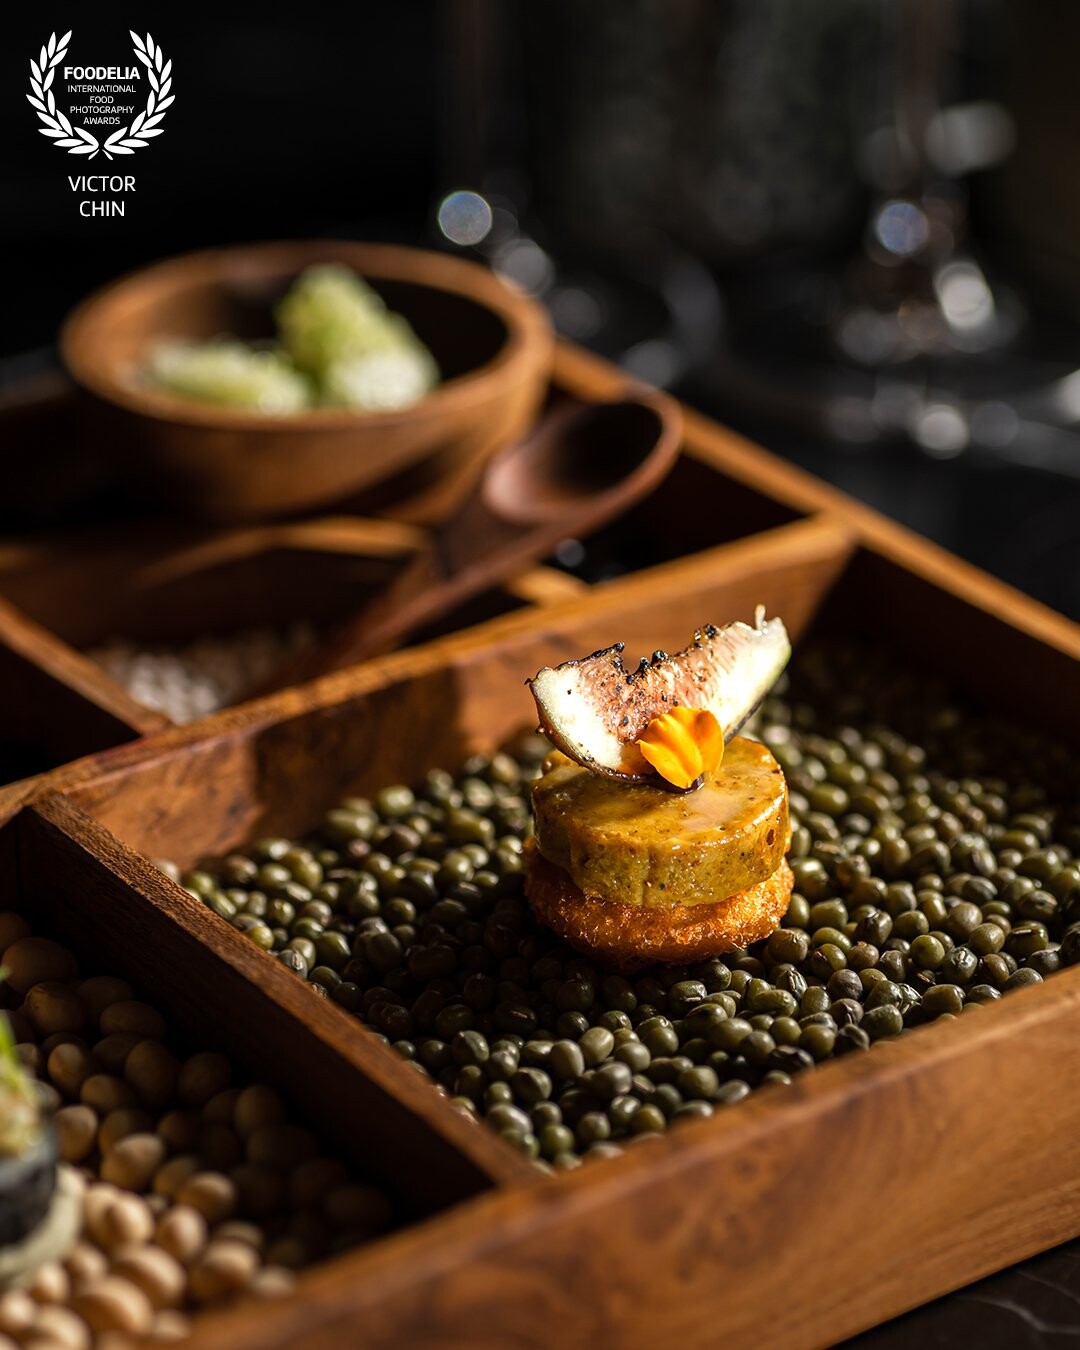 Had the opportunity to shoot this seasonal menu. A very unique dish in one of the best bar restaurants in Kuala Lumpur. Using Foie Gras in authentic malay flavor is remarkable.